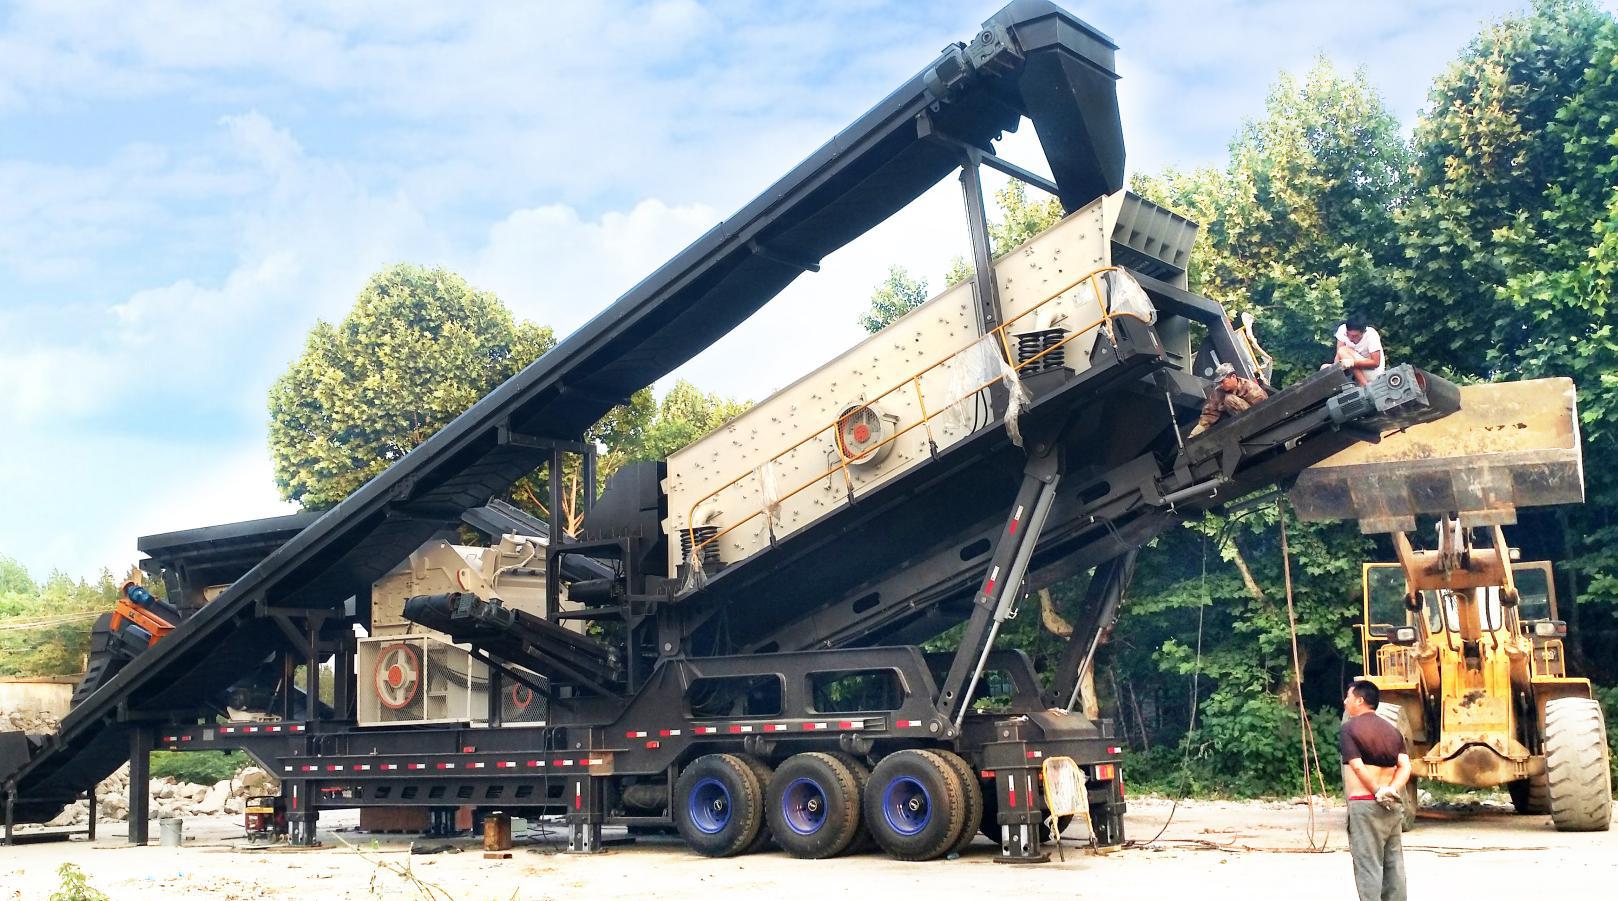 stone crusher plant for sale